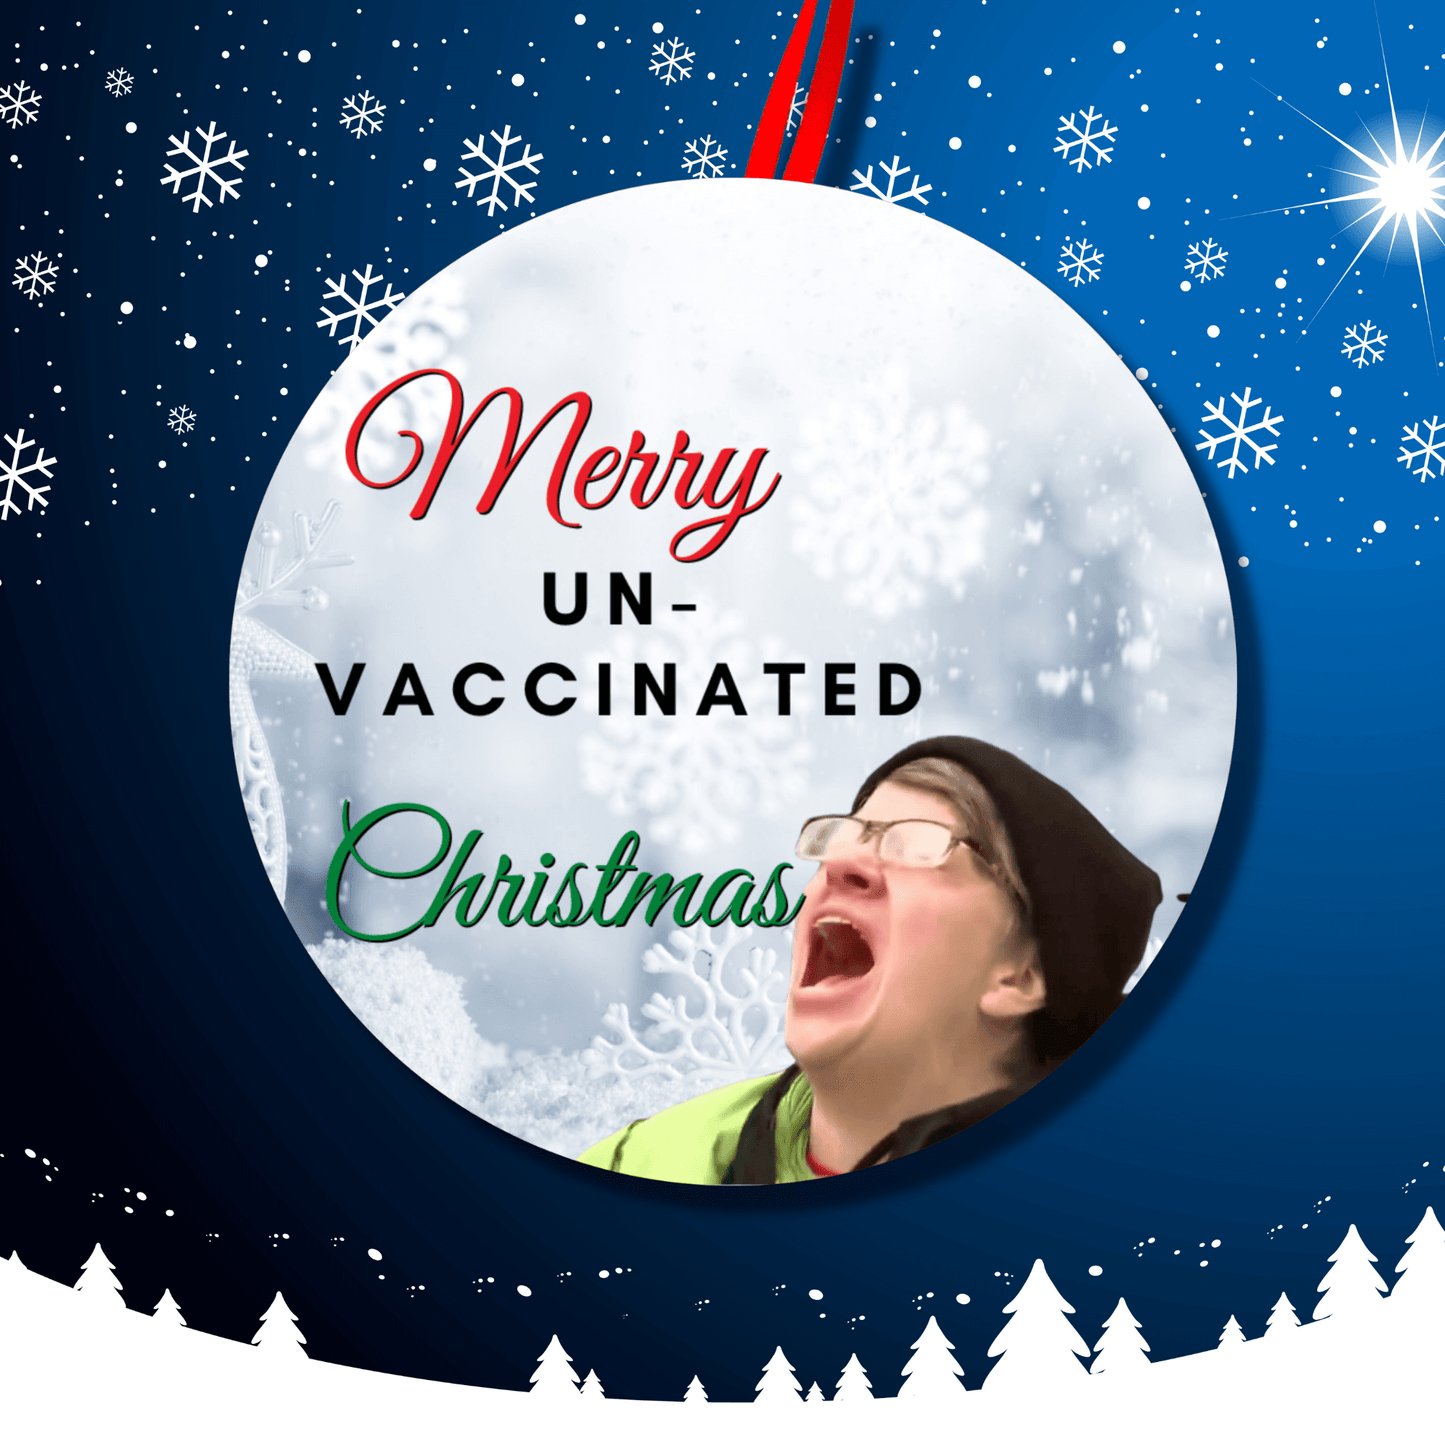 Merry UN-Vaccinated Christmas Ornament.